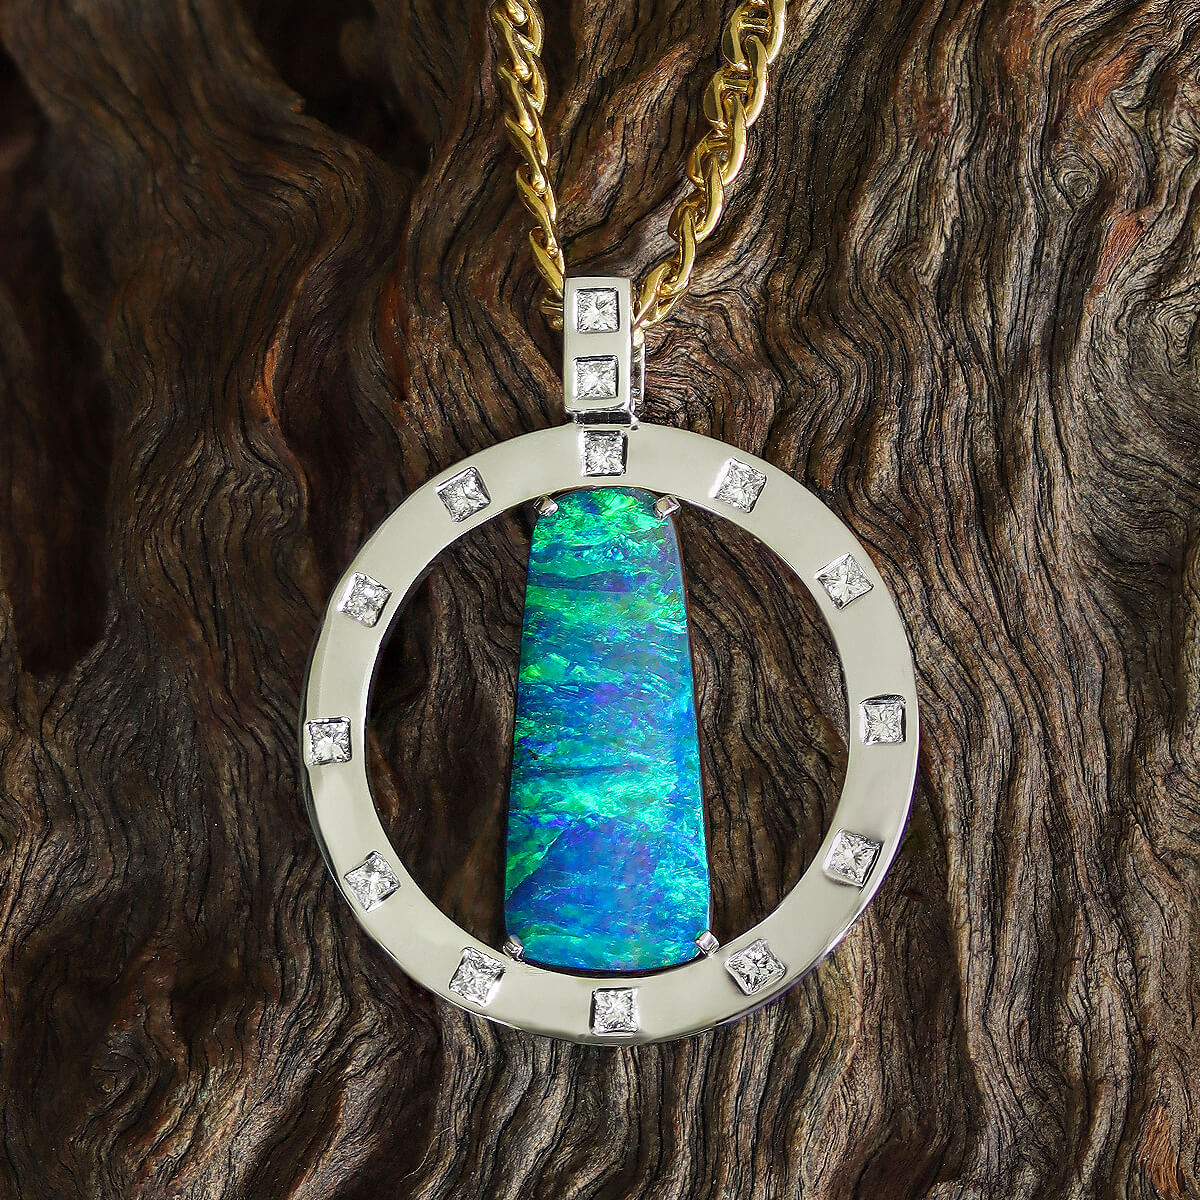 The round pendant consists of a flat platinum ring, and a rectangular boulder opal vertically set in the ring by four claws. The opal is a gem-grade quality natural solid Australian boulder opal, with beautiful vivid blue and green horizontally striated pattern. The ring that encloses the opal is silver in colour, made of platinum and has 12 colourless high jewellery grade princess cut diamonds set all around it, just like the numbers on a clock. The bail is rectangular in shape and there’s two more princess cut diamonds set in it, one above another. Through the bail passes a thick 18K solid gold chain. This is a front on view of a boulder opal pendant resting on textured natural wood.